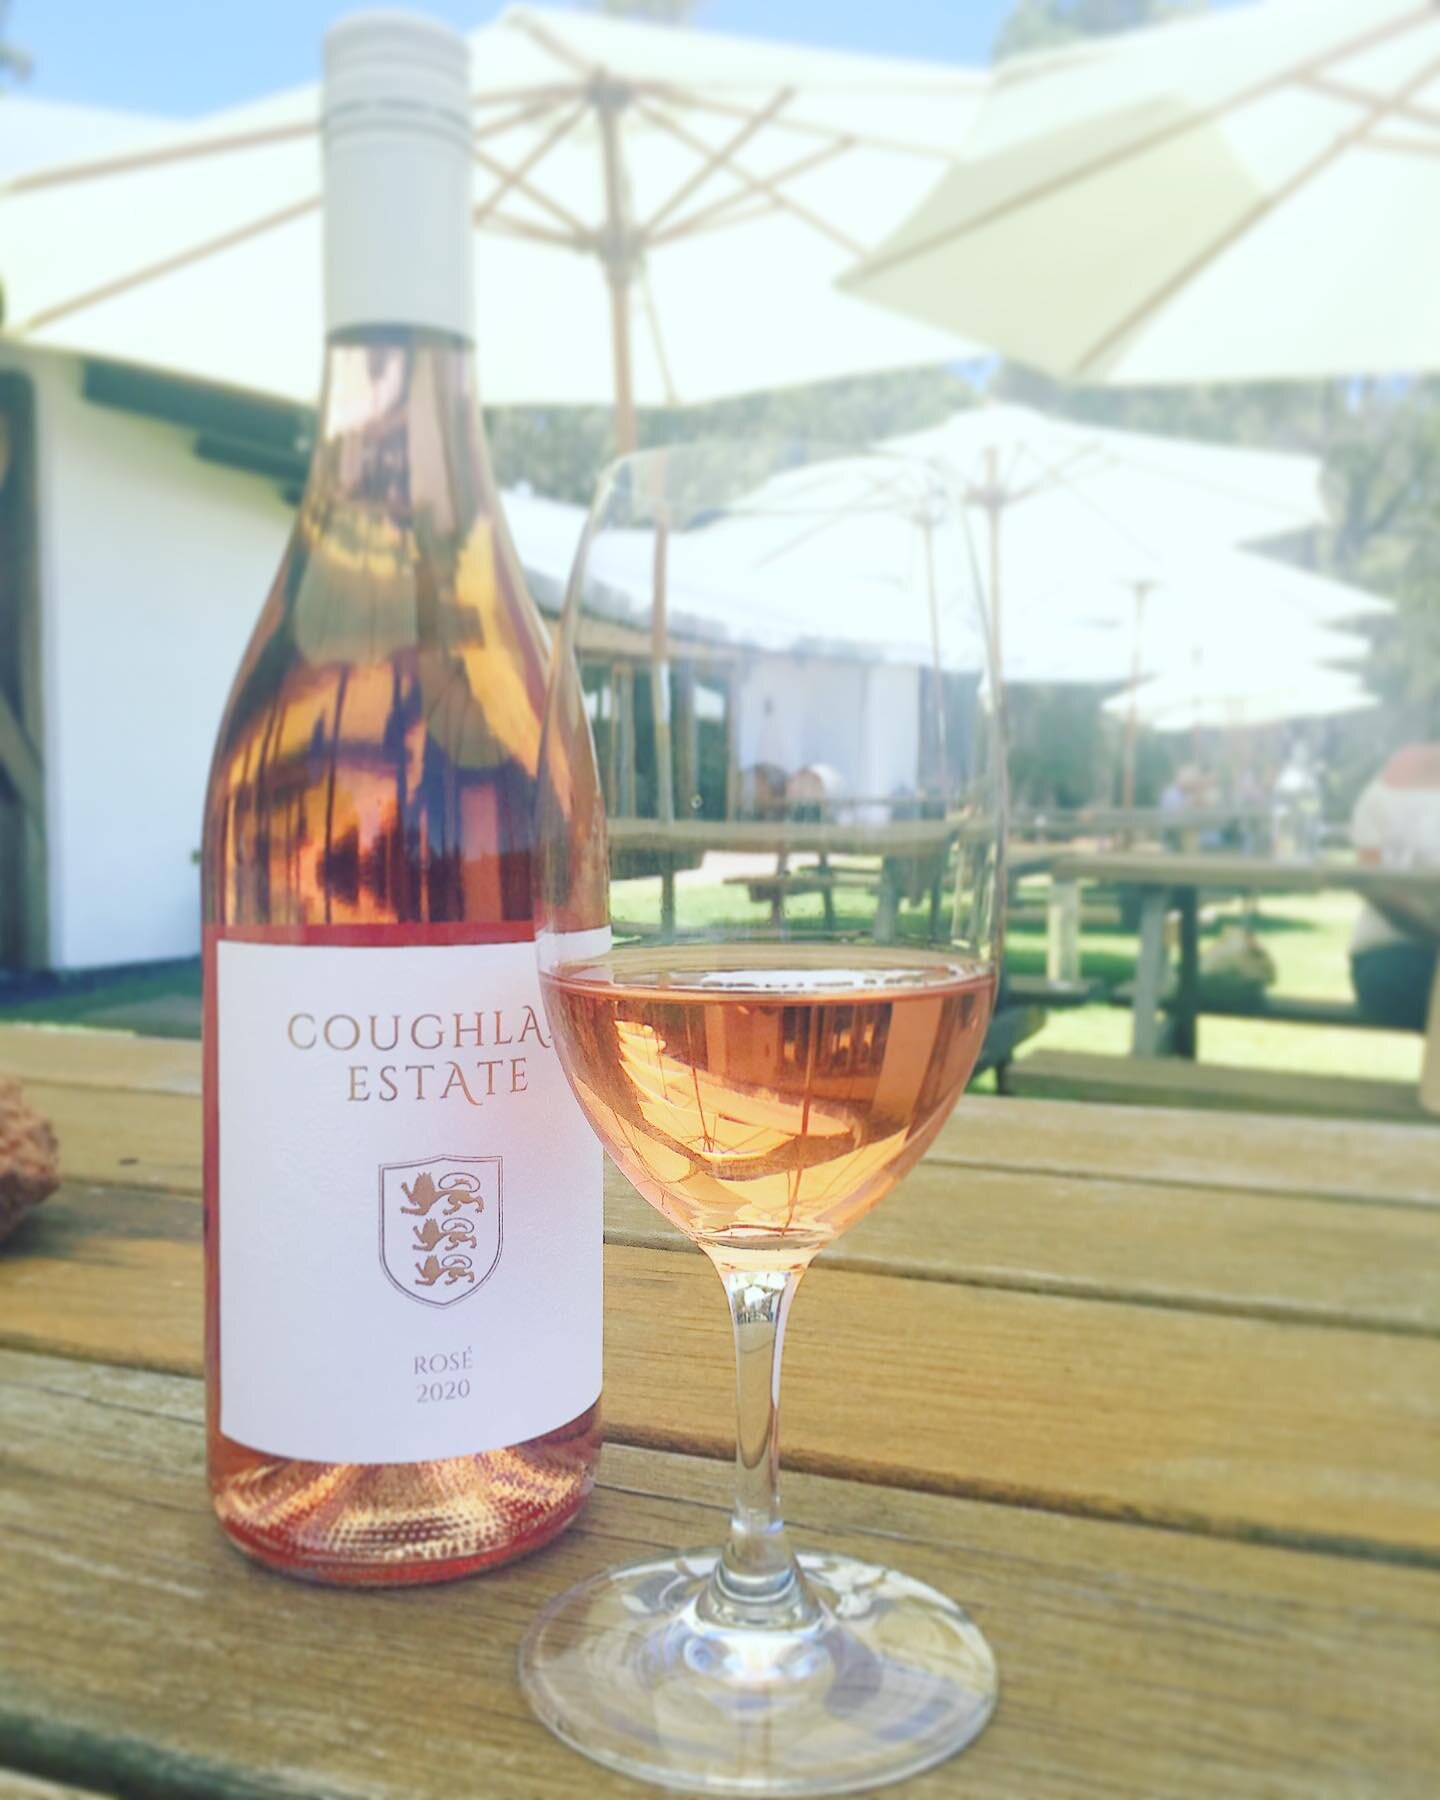 🌷its a &ldquo;Ros&eacute; under the brolly&rdquo; kind of day!🍷
We are open today and tomorrow ....the weather is glorious and our wine is wonderful!🍷
📸 @yabberup_studio 
0409831926
Thursday-Monday 11-4
info@coughlanestate.com.au